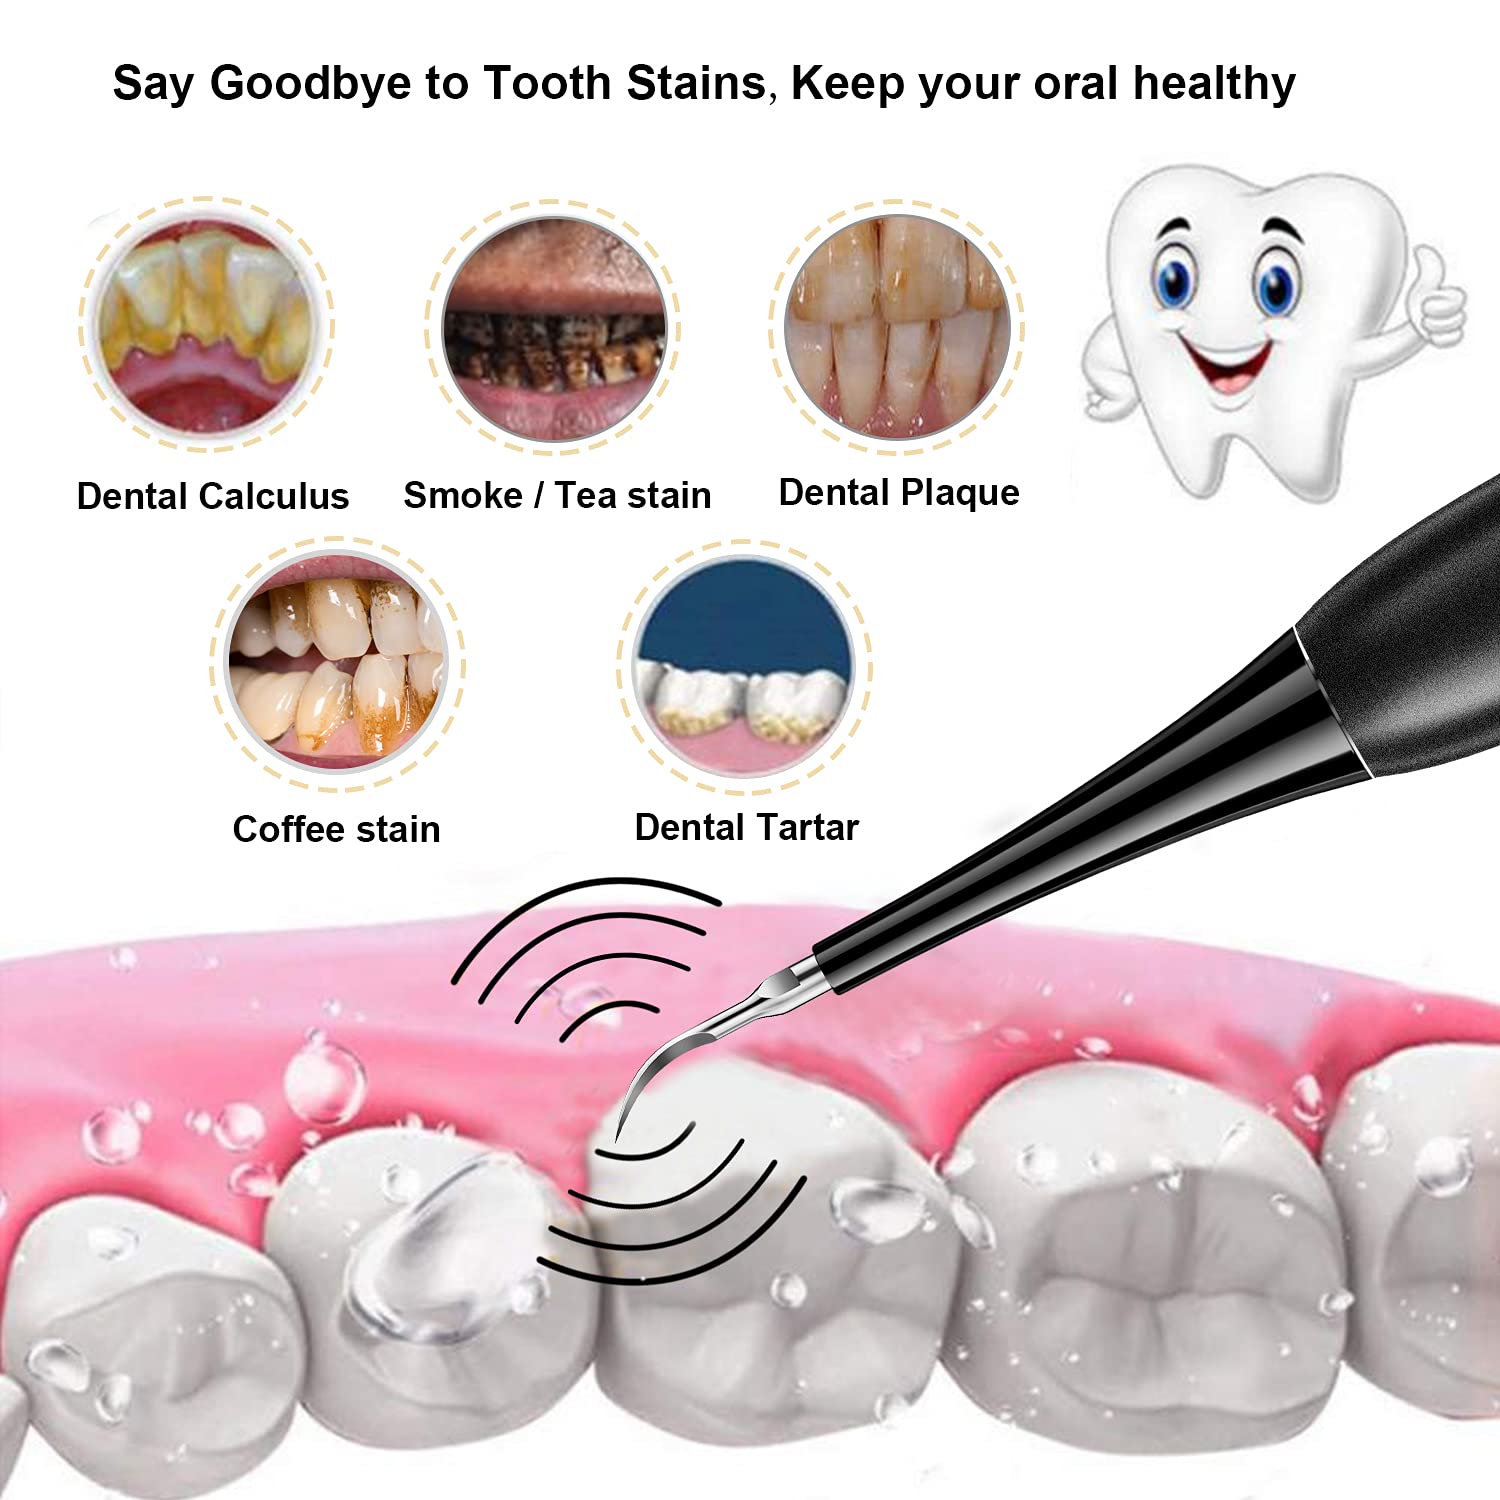 2023 New Year Limited Time Sale 70% OFF🎉Electric tooth cleaning instrument🔥Buy 2 Get Free Shipping